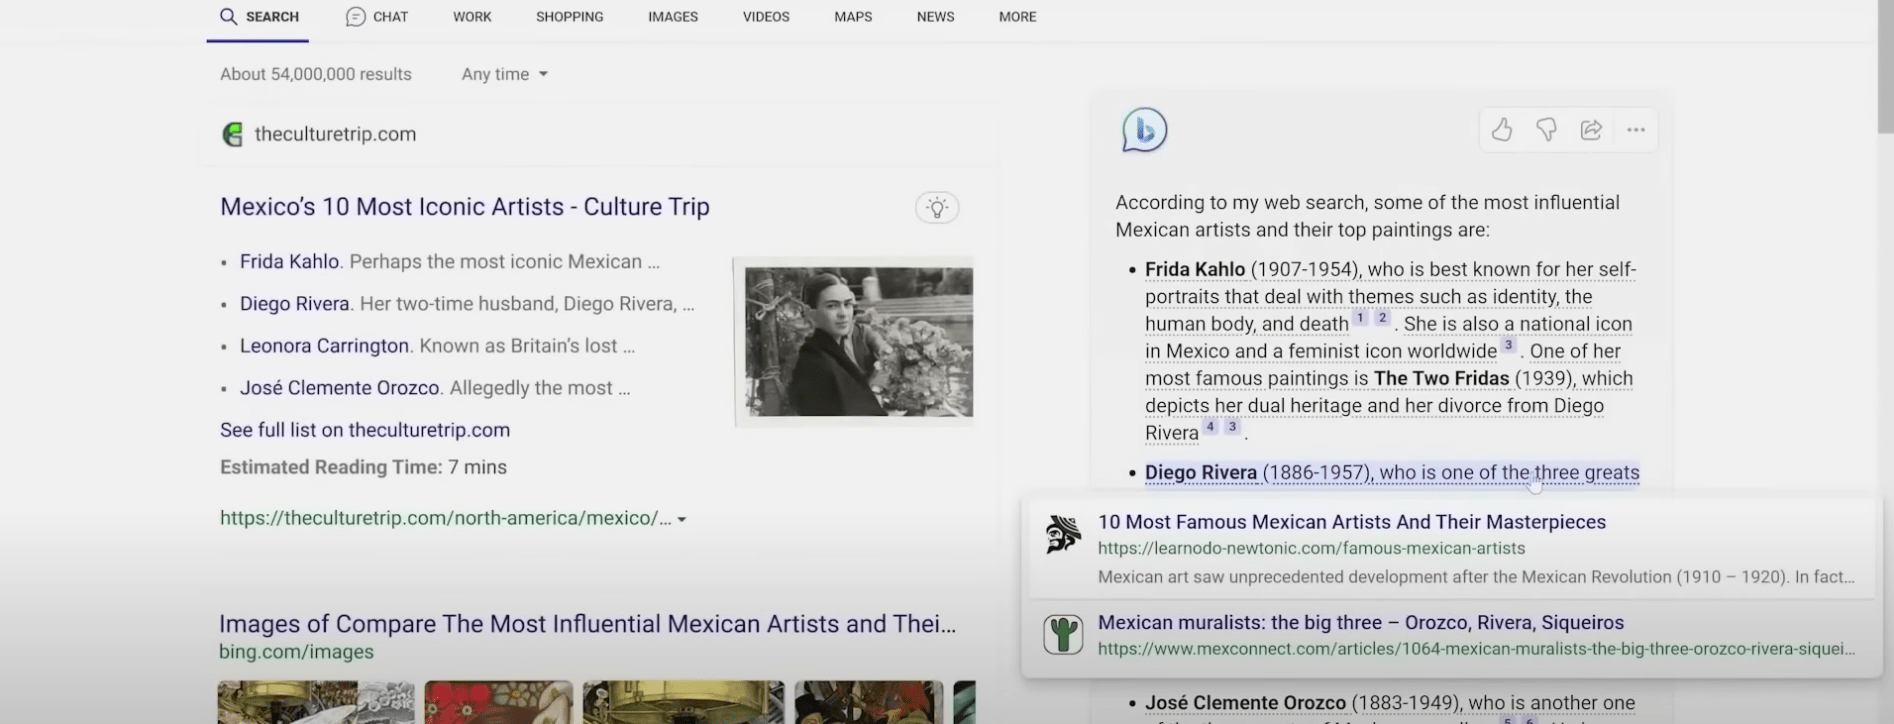 Example of Frida Kahlo search results using Microsoft AI-Powered Bing